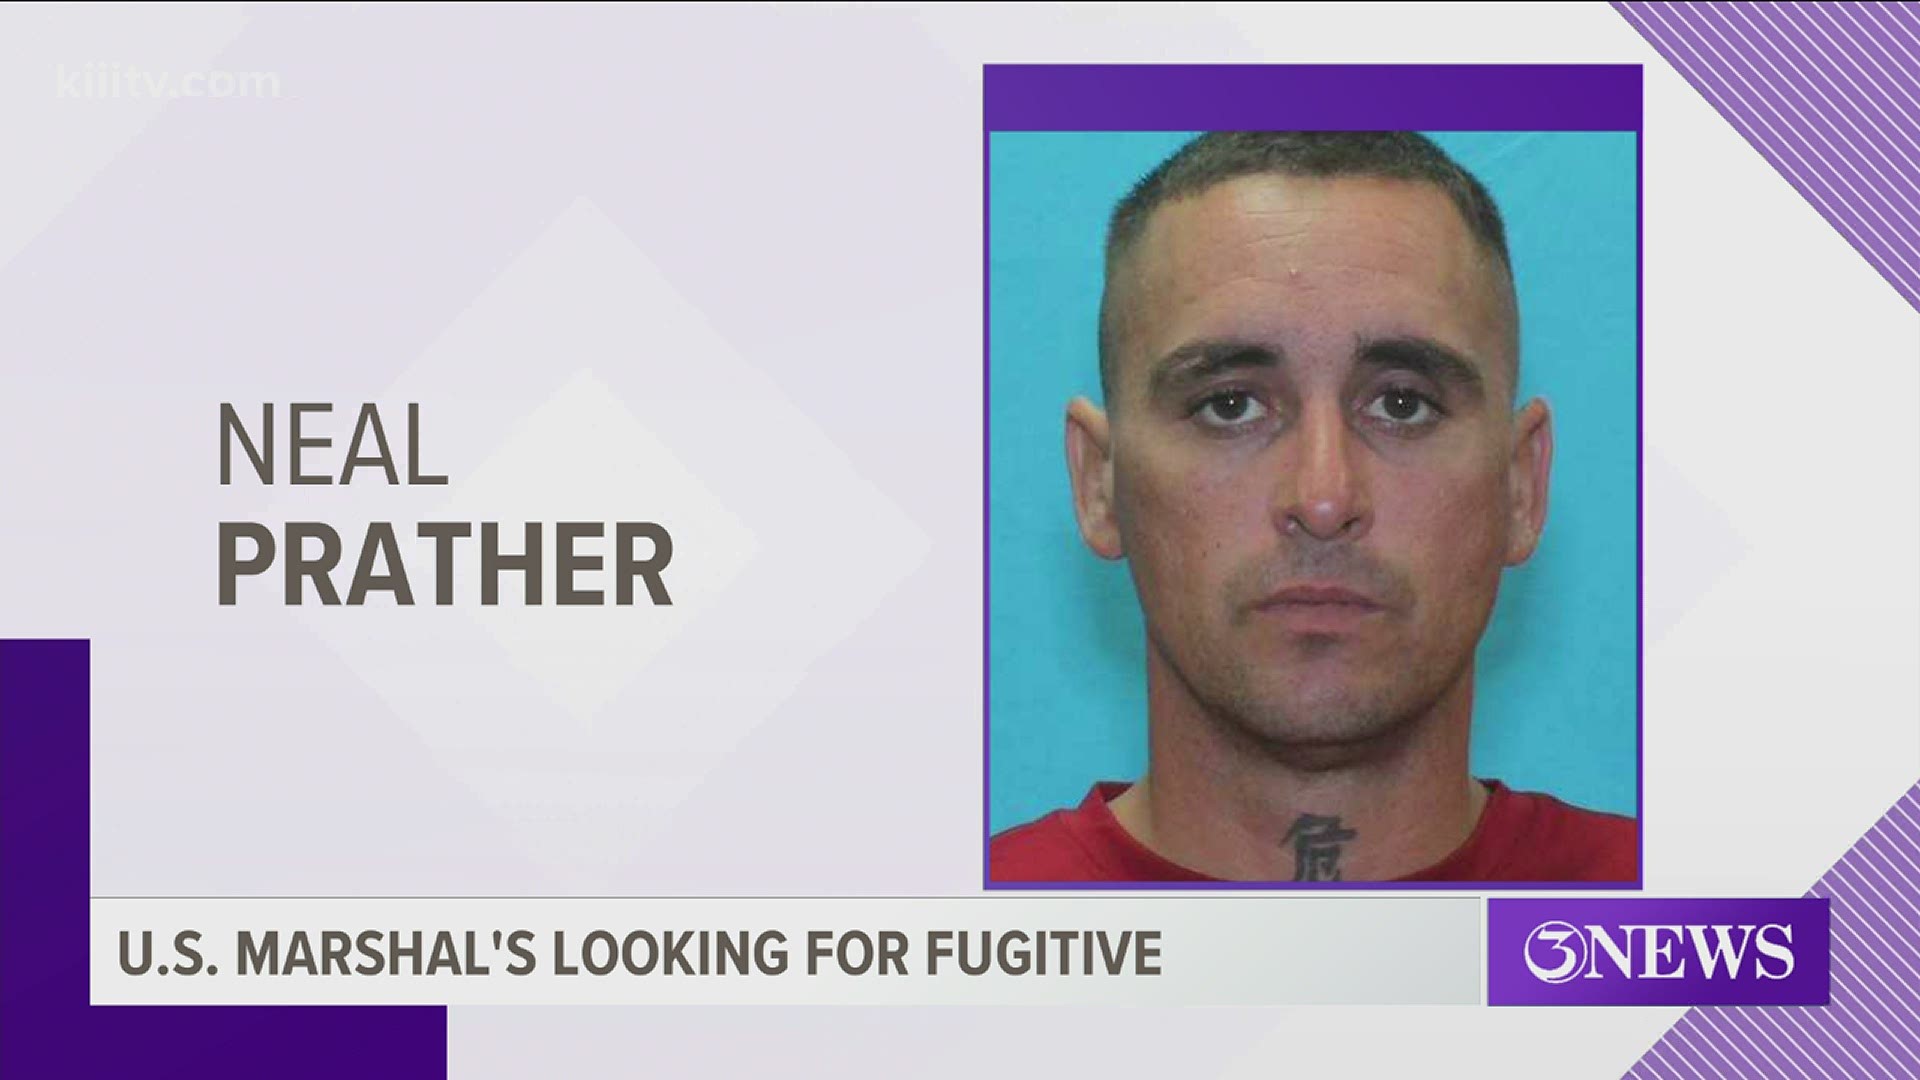 Neal Prather is wanted on a pair of warrants out of Jim Wells Co